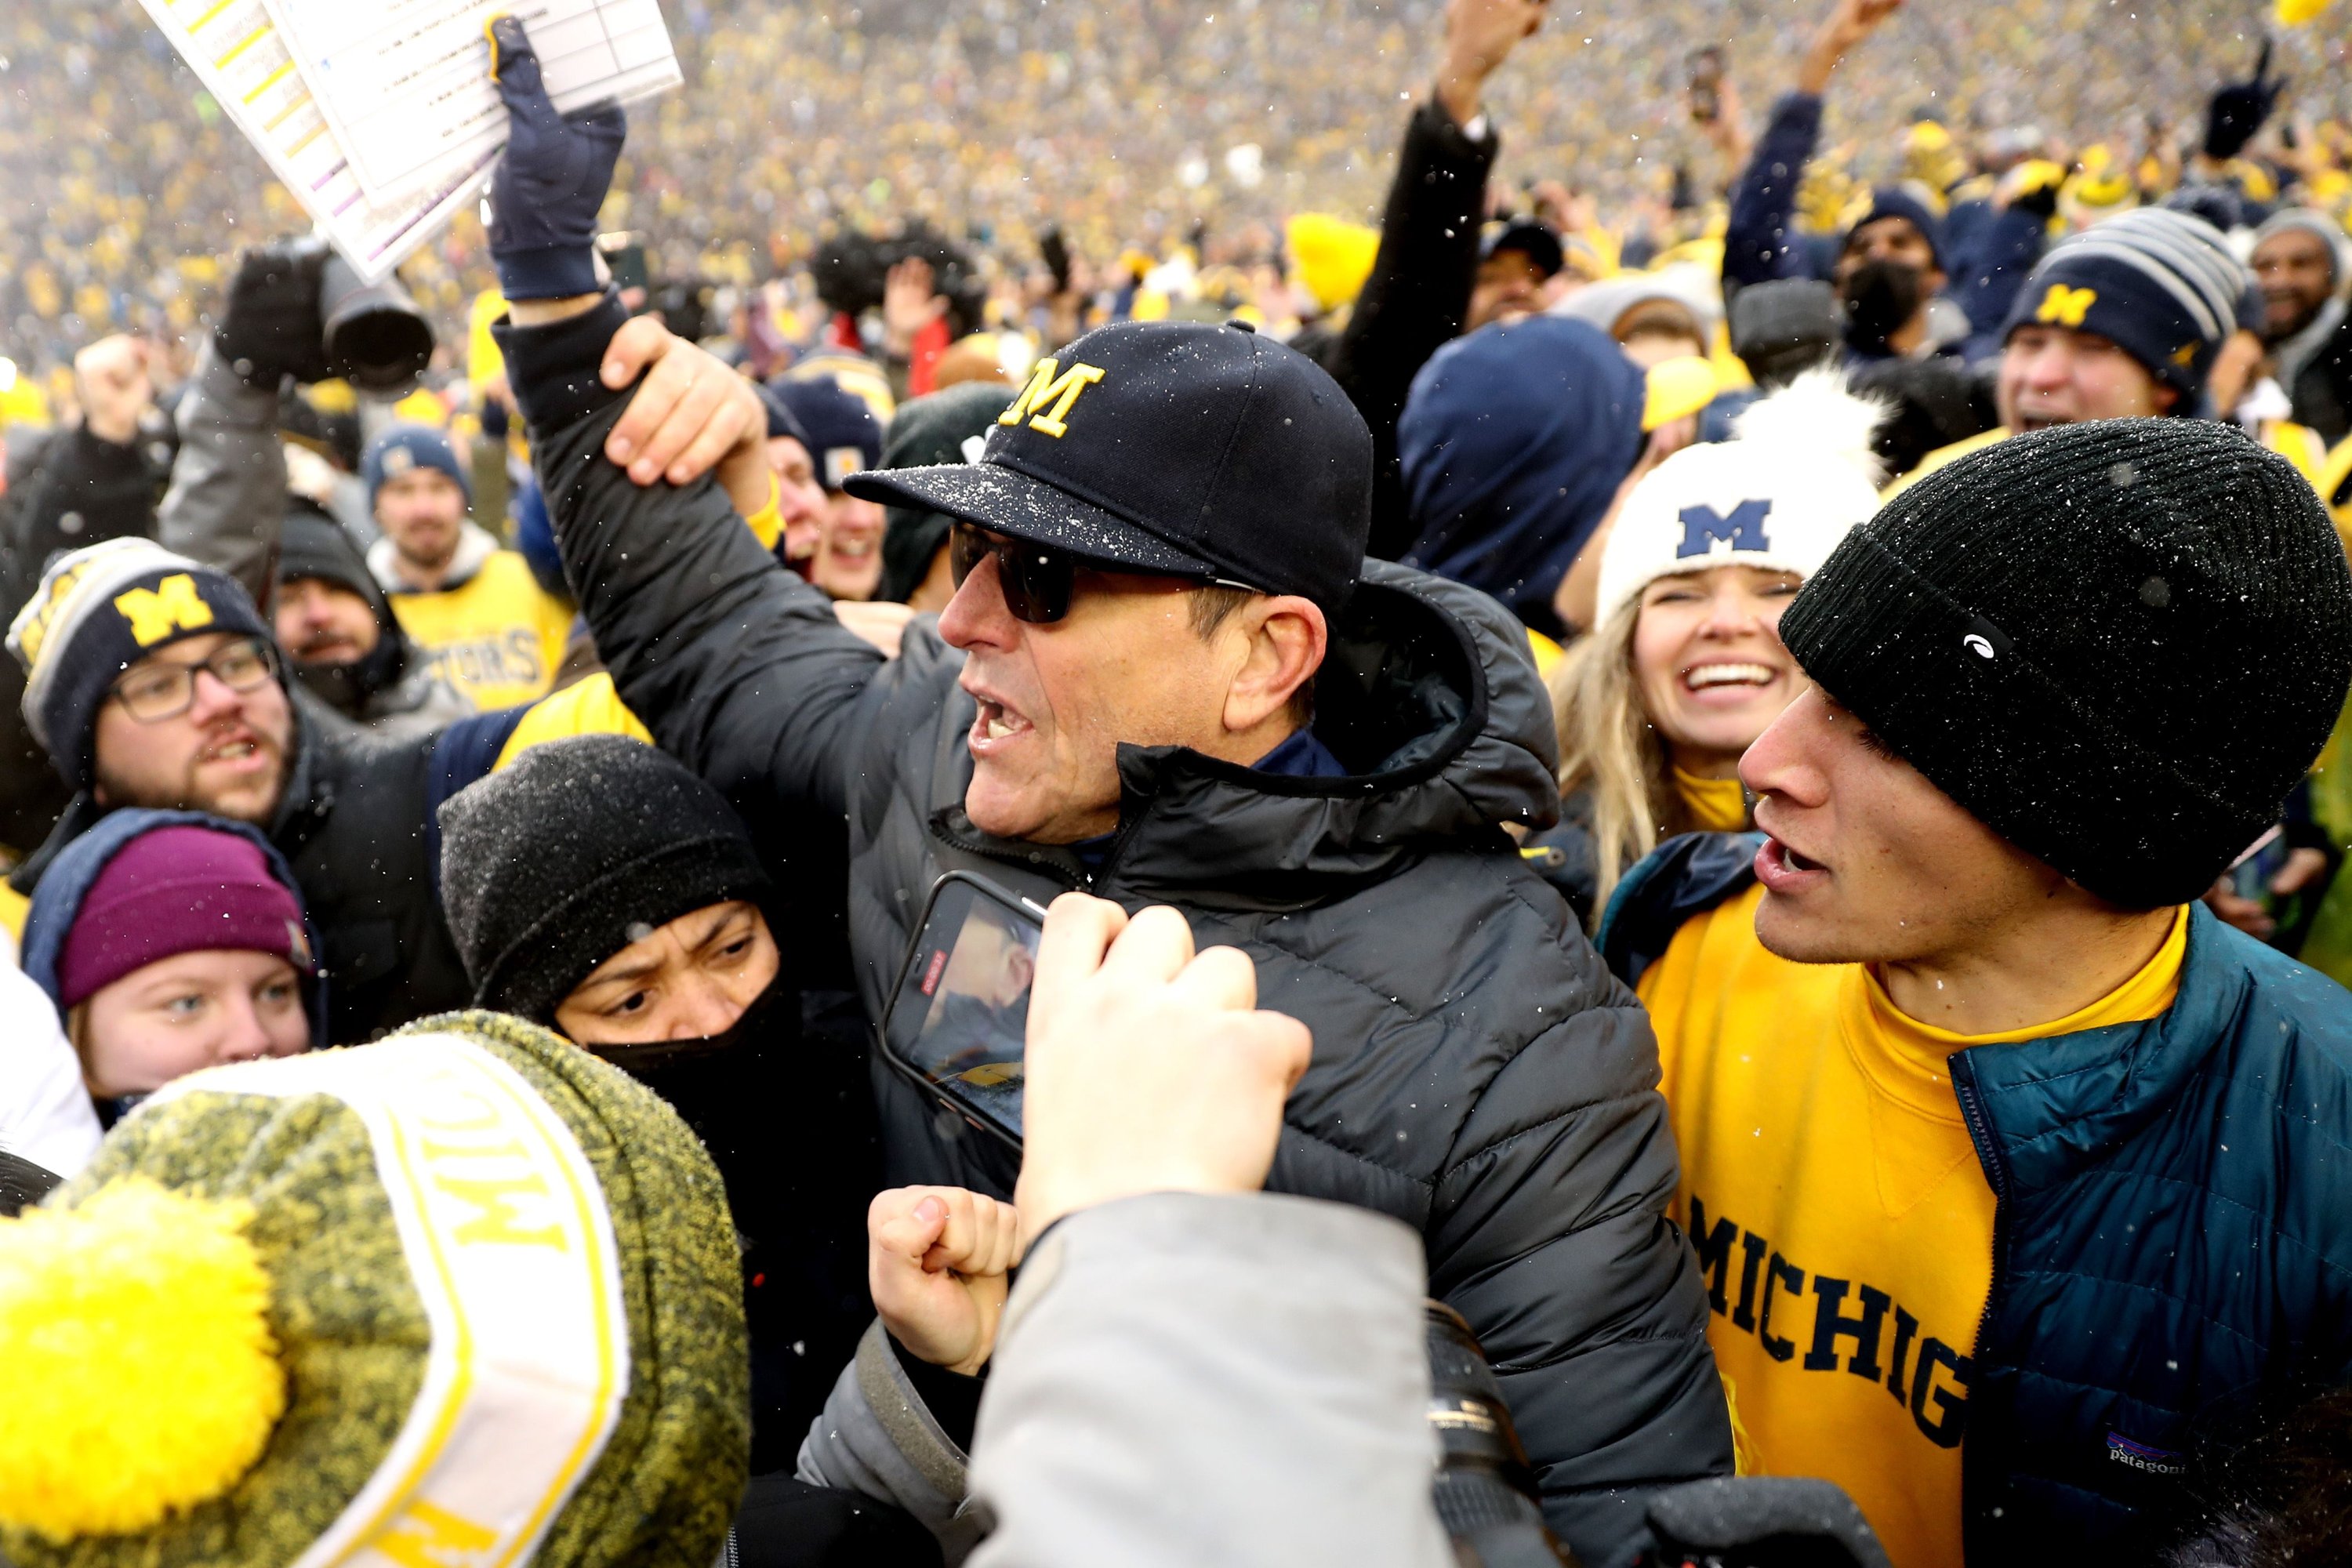 Head Coach Jim Harbaugh of the Michigan Wolverines celebrates with fans after defeating the Ohio State Buckeyes at Michigan Stadium, Ann Arbor, Michigan, U.S., Nov. 27, 2021. (AFP Photo)